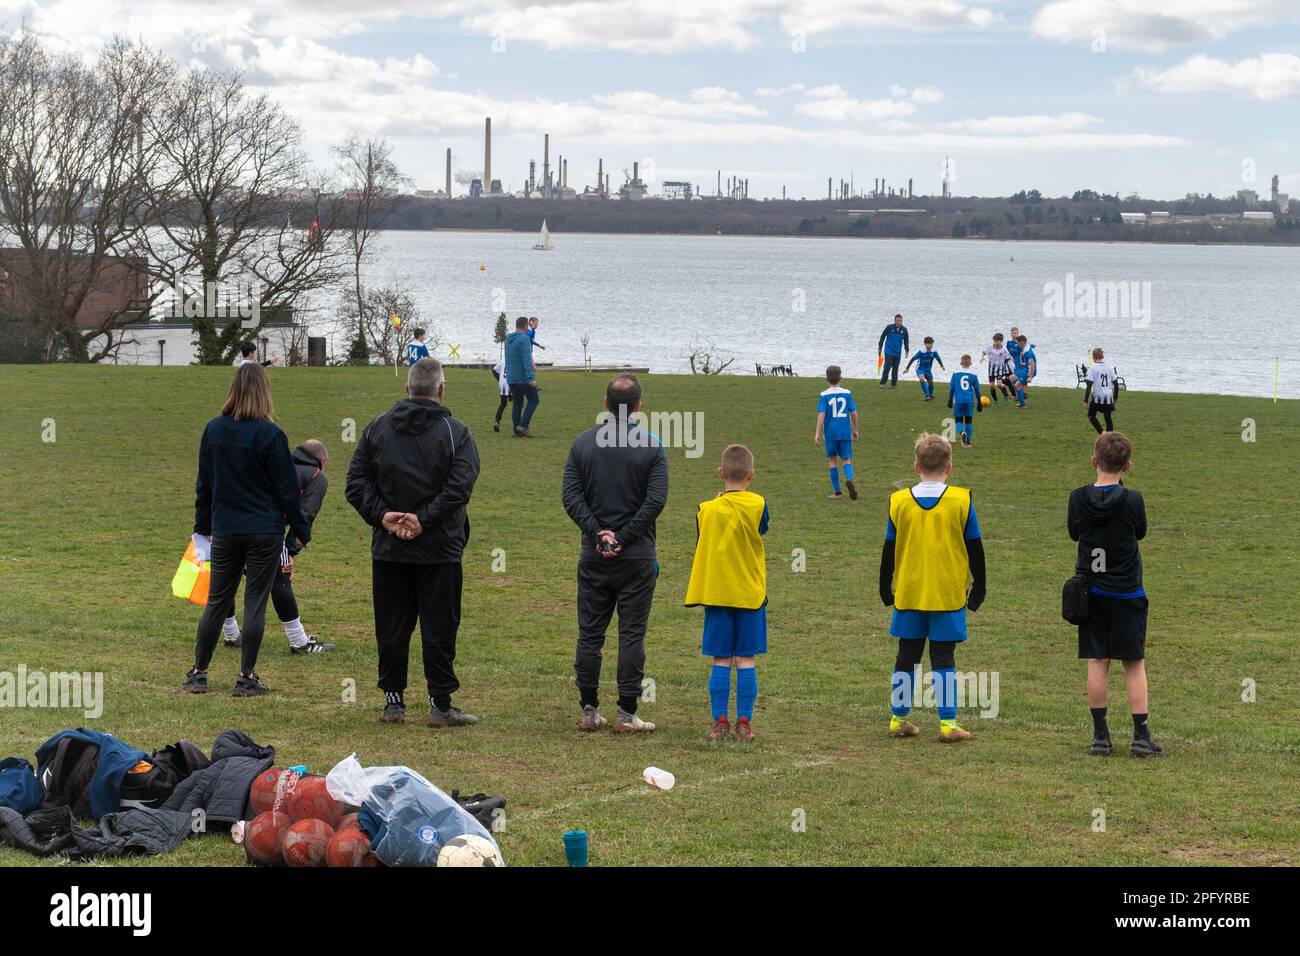 Junior football, boys soccer game on a Sunday morning by the seaside at Netley, Hampshire, England, UK Stock Photo